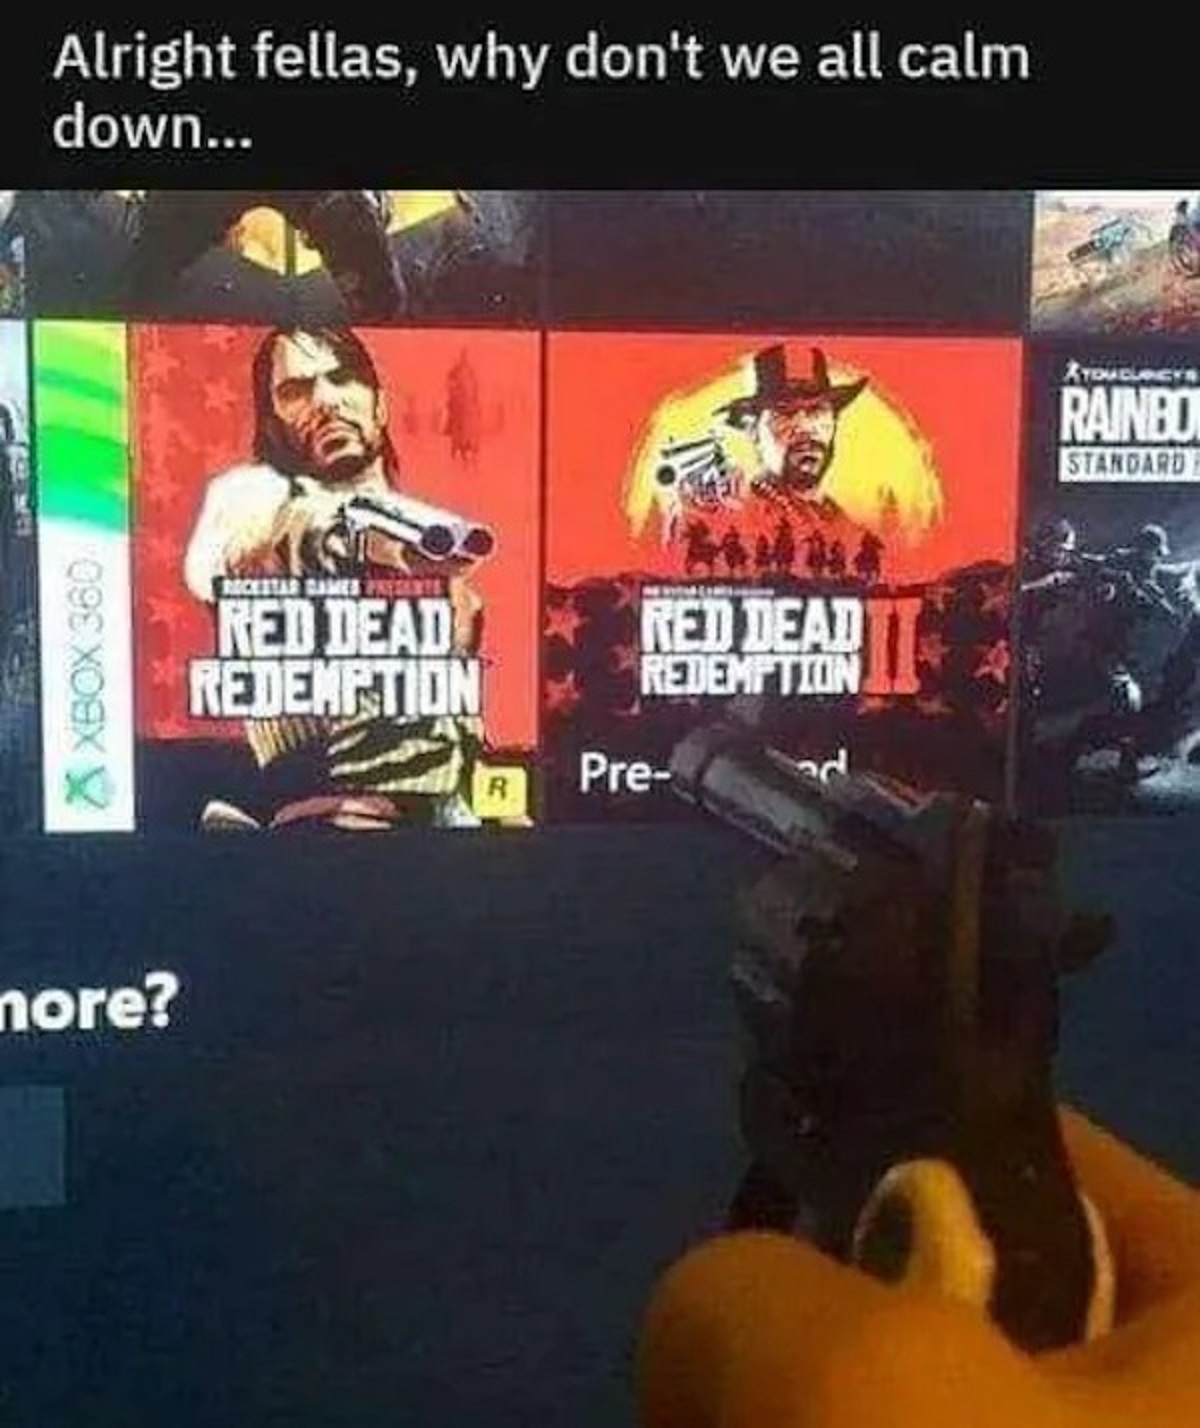 rdr2 memes - Xbox 360 more? Alright fellas, why don't we all calm down... Recestar Games Presents Red Dead Redemption Red Dead Redemption Pre R Atoucureys Rainbo Standard